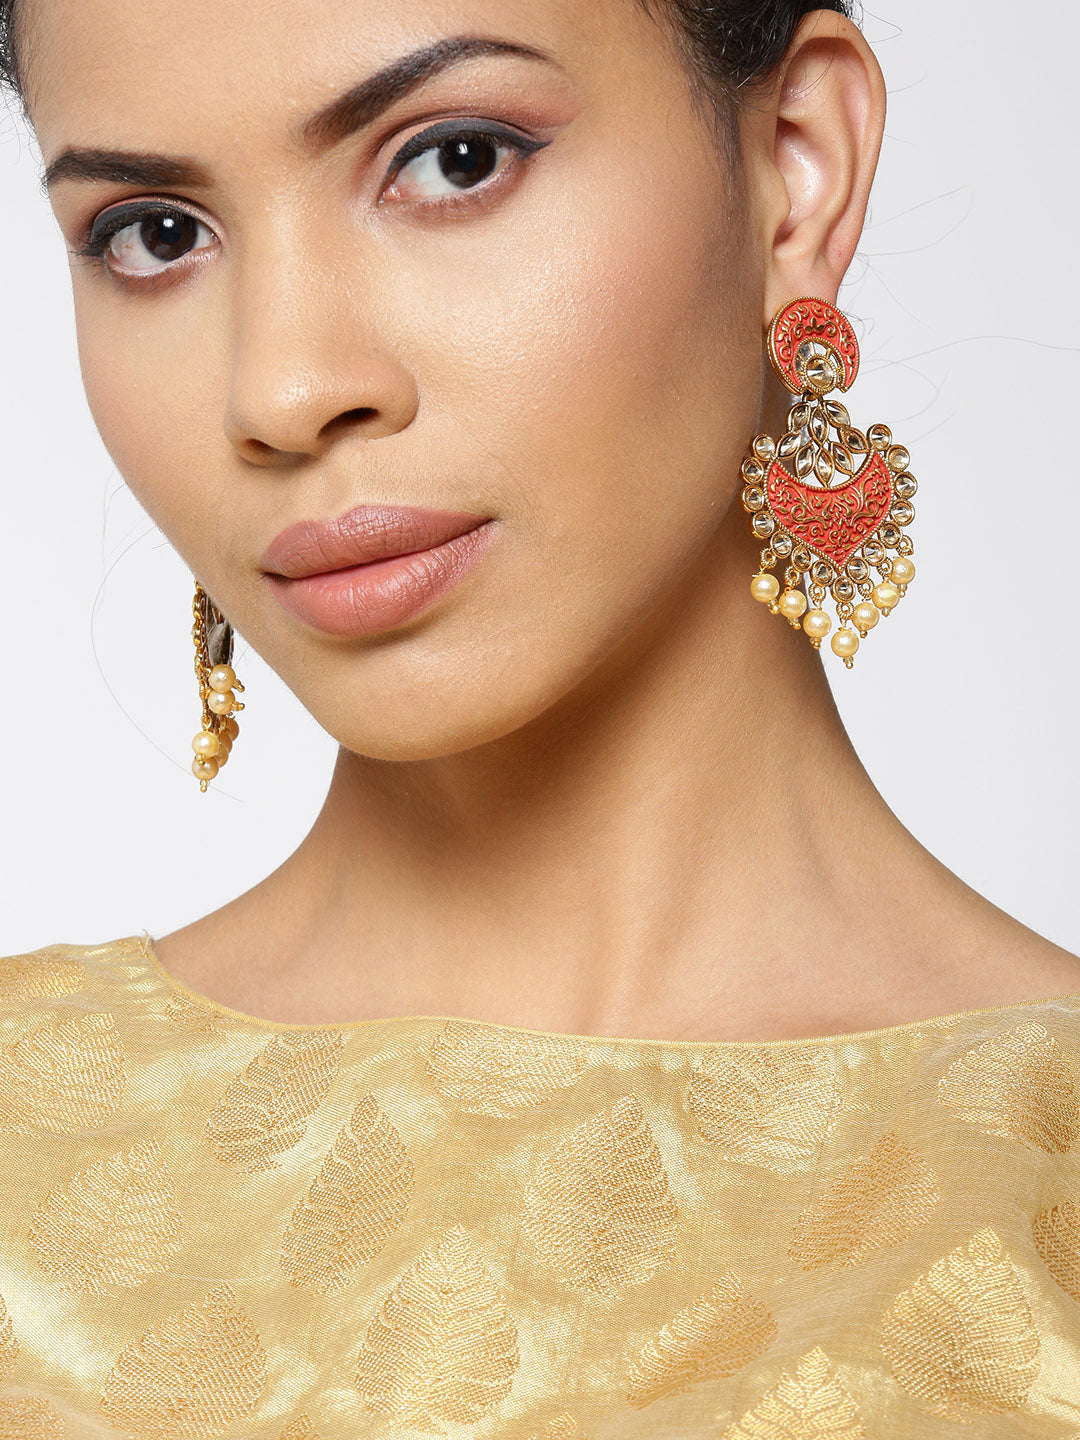 Gold-Plated Stone Studded Drop Earrings with Meenakari In Red Color with Pearls Drop